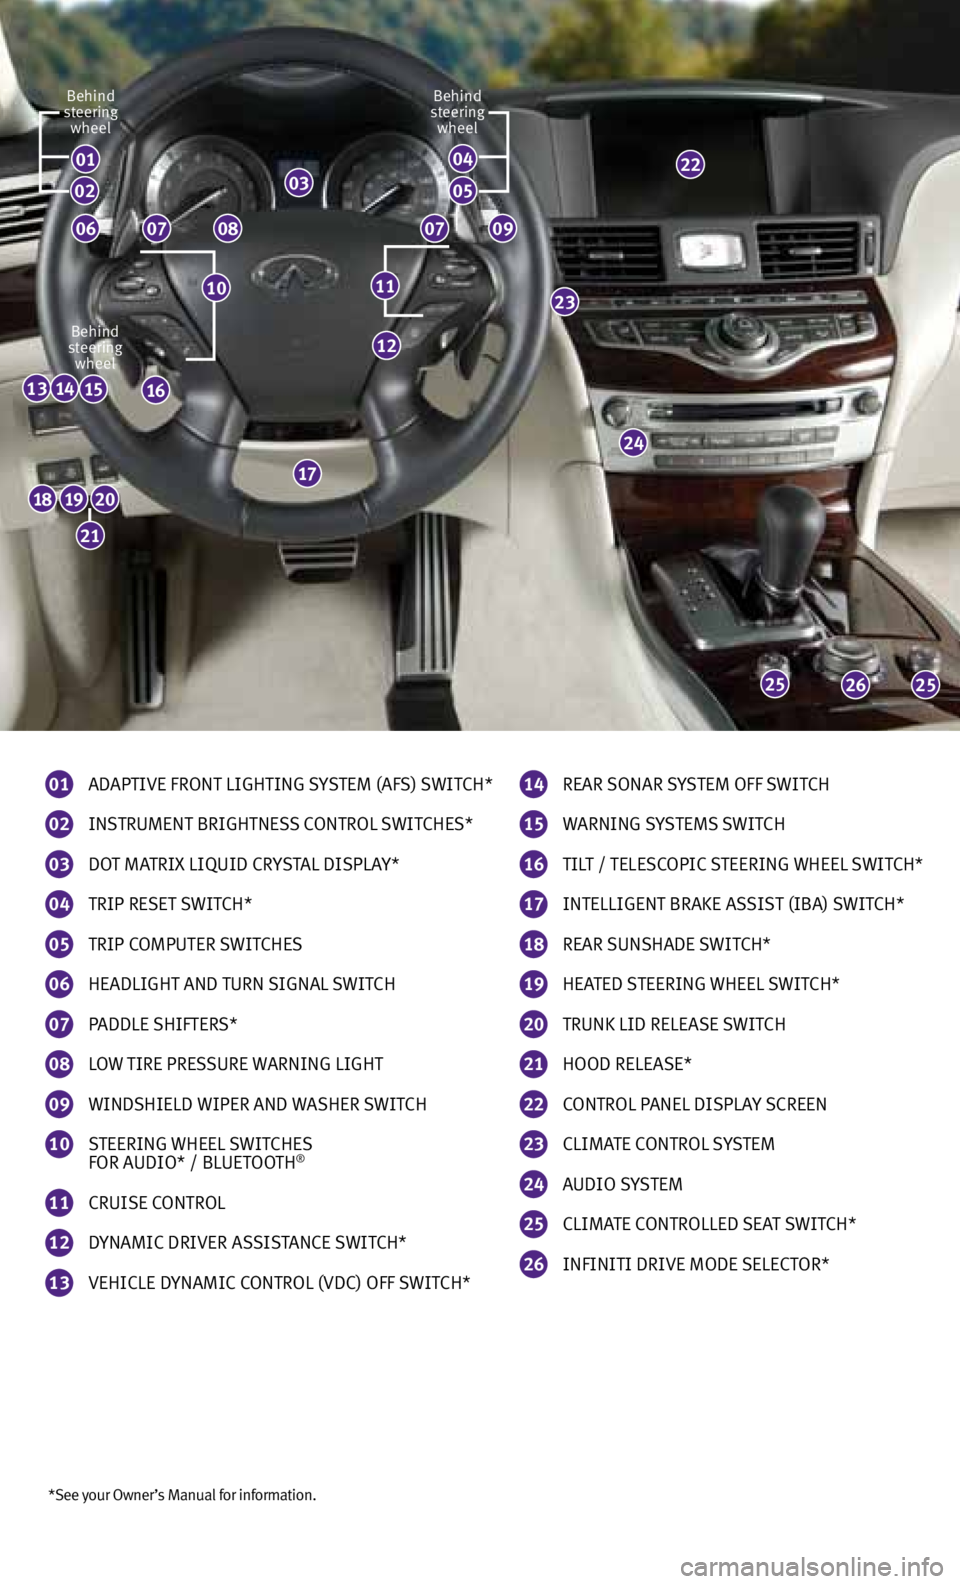 INFINITI M 2013  Quick Reference Guide *See your Owner’s Manual for information.
01 
Ad AptIve FROnt LIGhtInG  SySteM (AFS) SwItch* 
02  
InS tRuMent BRIGhtne SS cOntROL  SwItcheS* 
03 
dO t MA tRIx LIQuId cRy StAL  dIS pLAy* 
04 
tRIp R